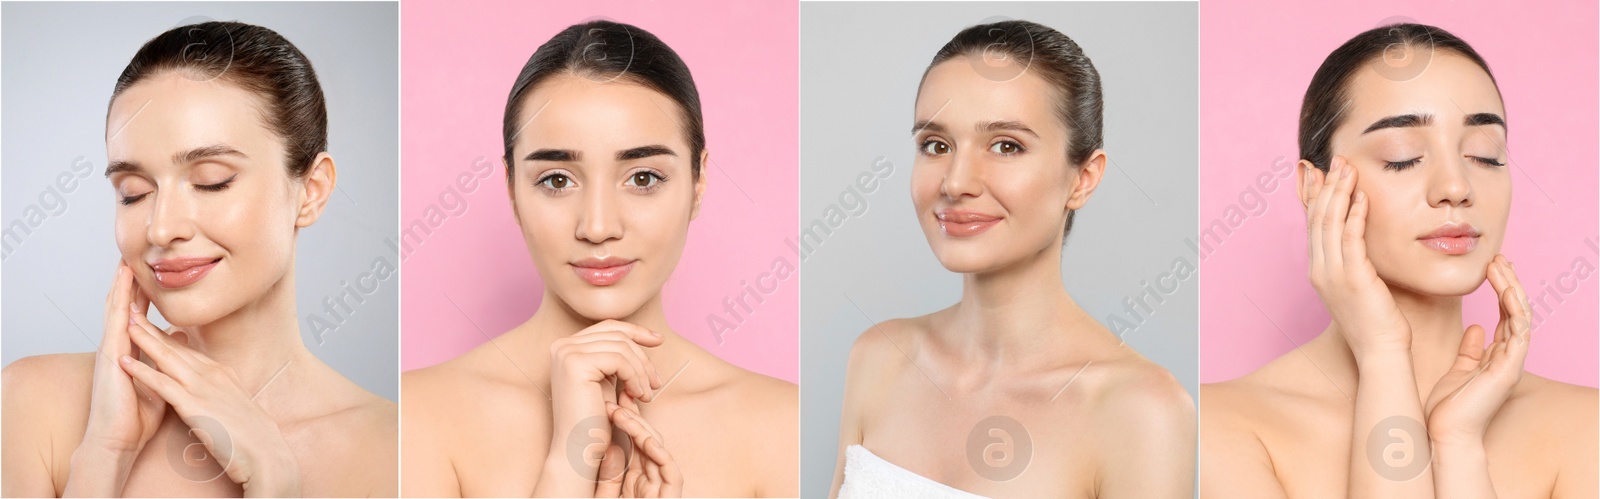 Image of Young beautiful women with perfect skin on different color backgrounds, collage of portraits. Banner design